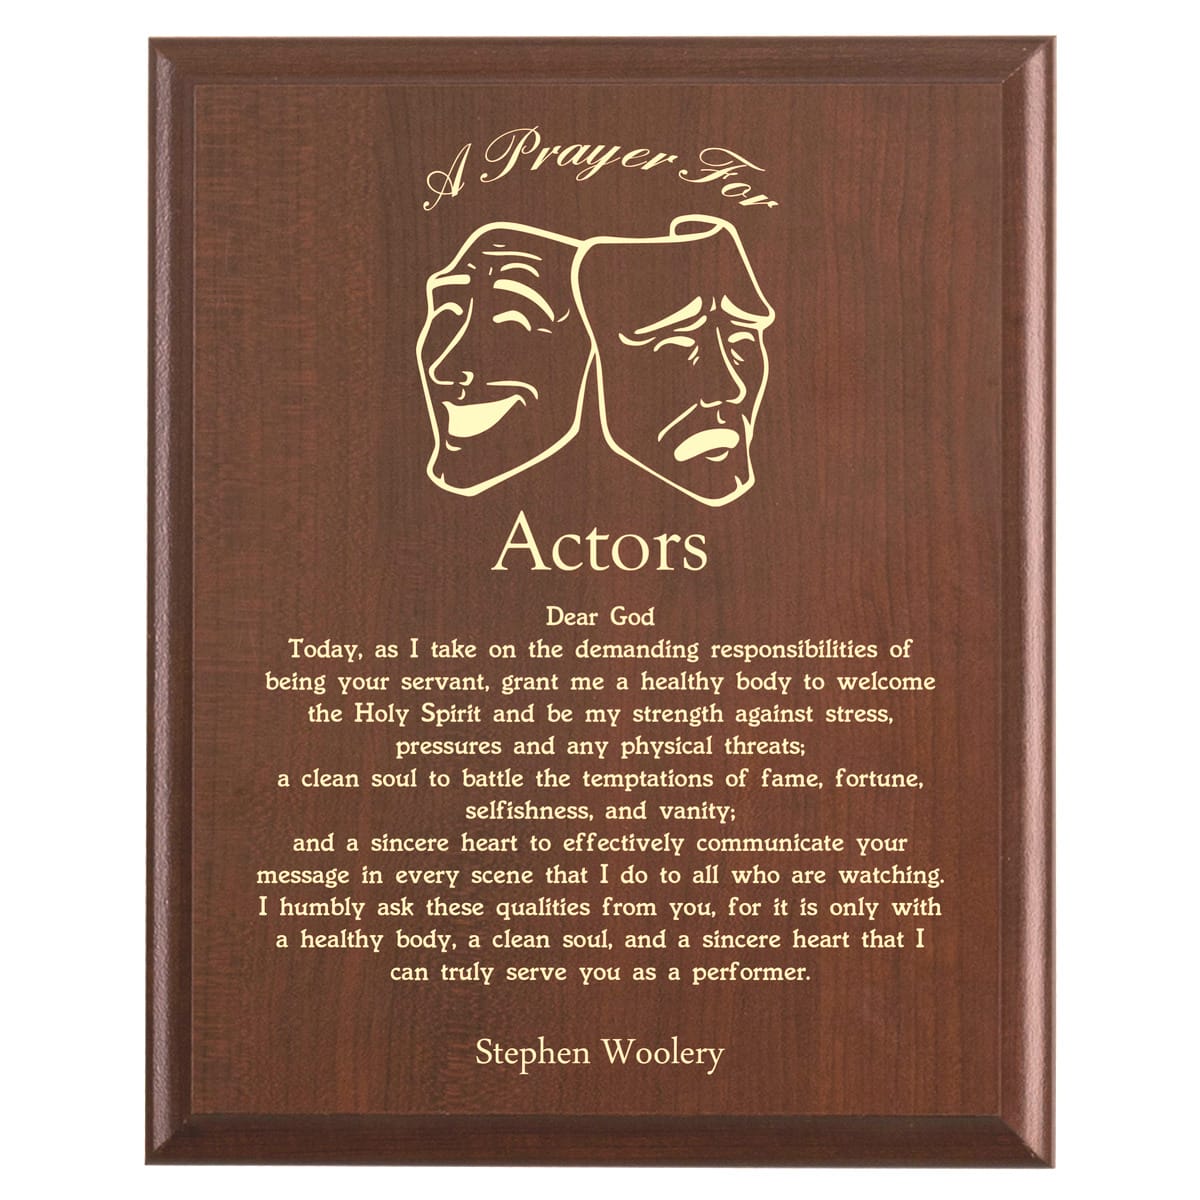 Plaque photo: Actor Prayer Plaque design with free personalization. Wood style finish with customized text.